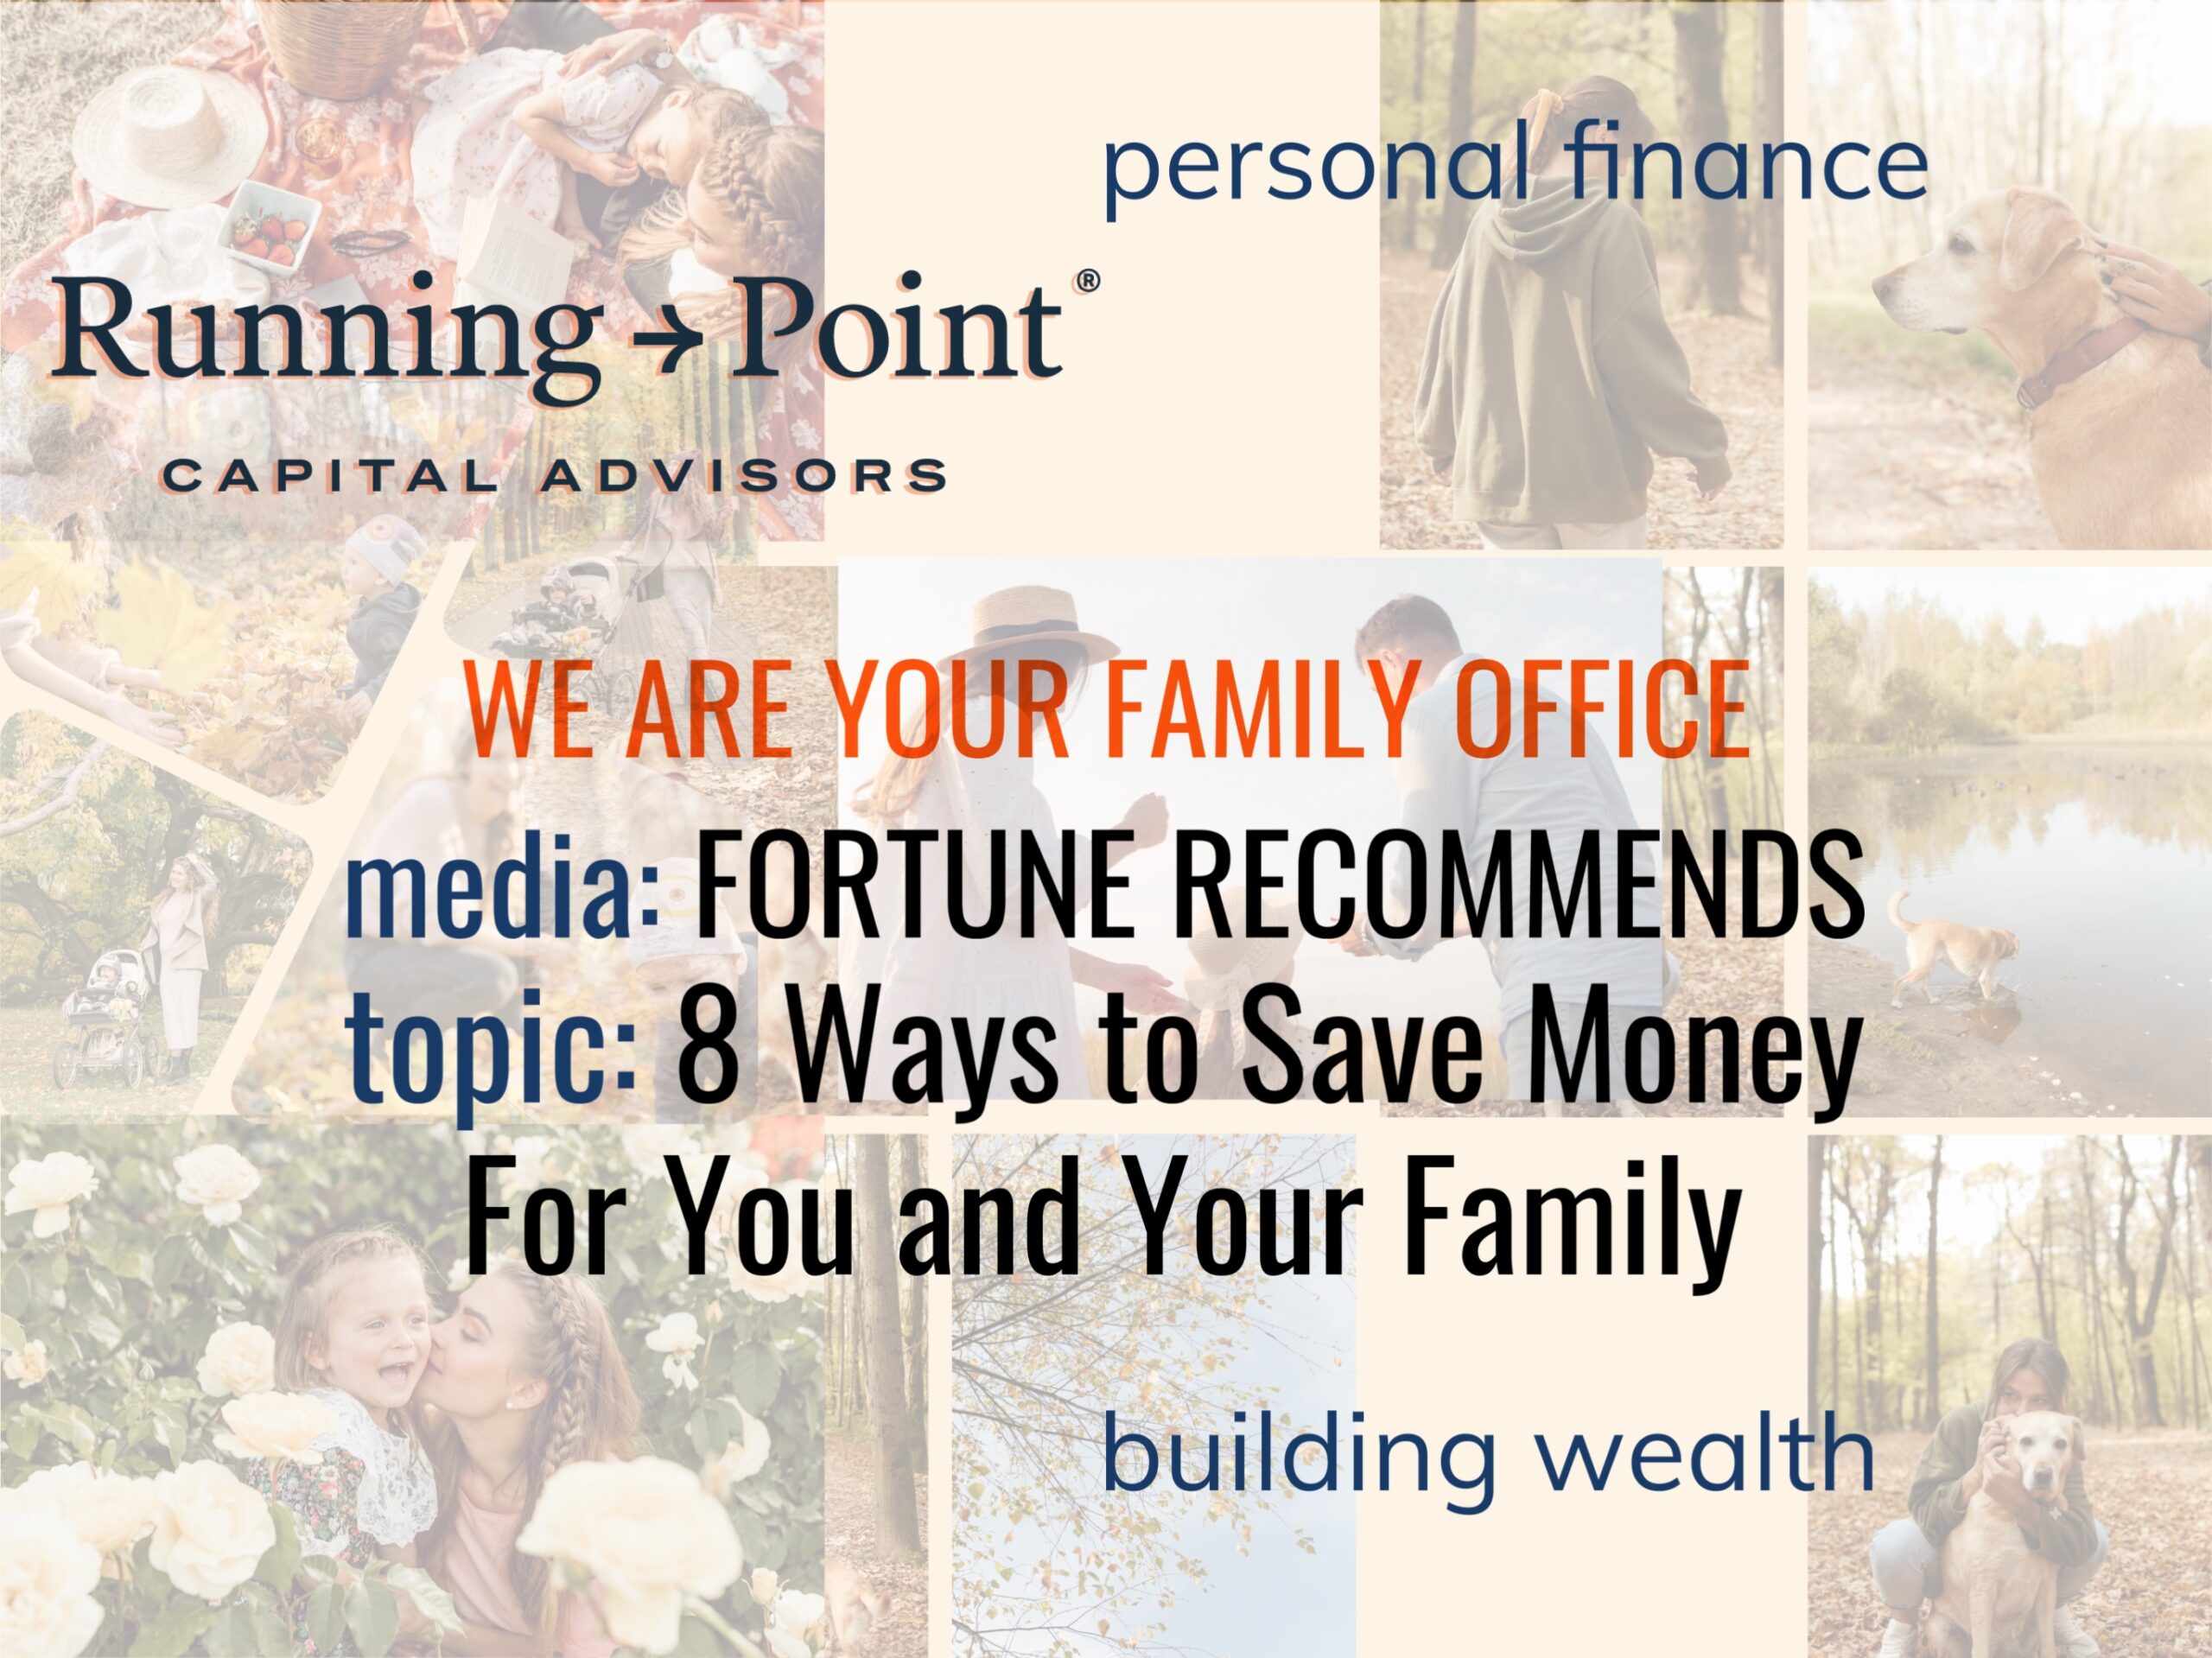 Fortune Recommends: Save money, build wealth